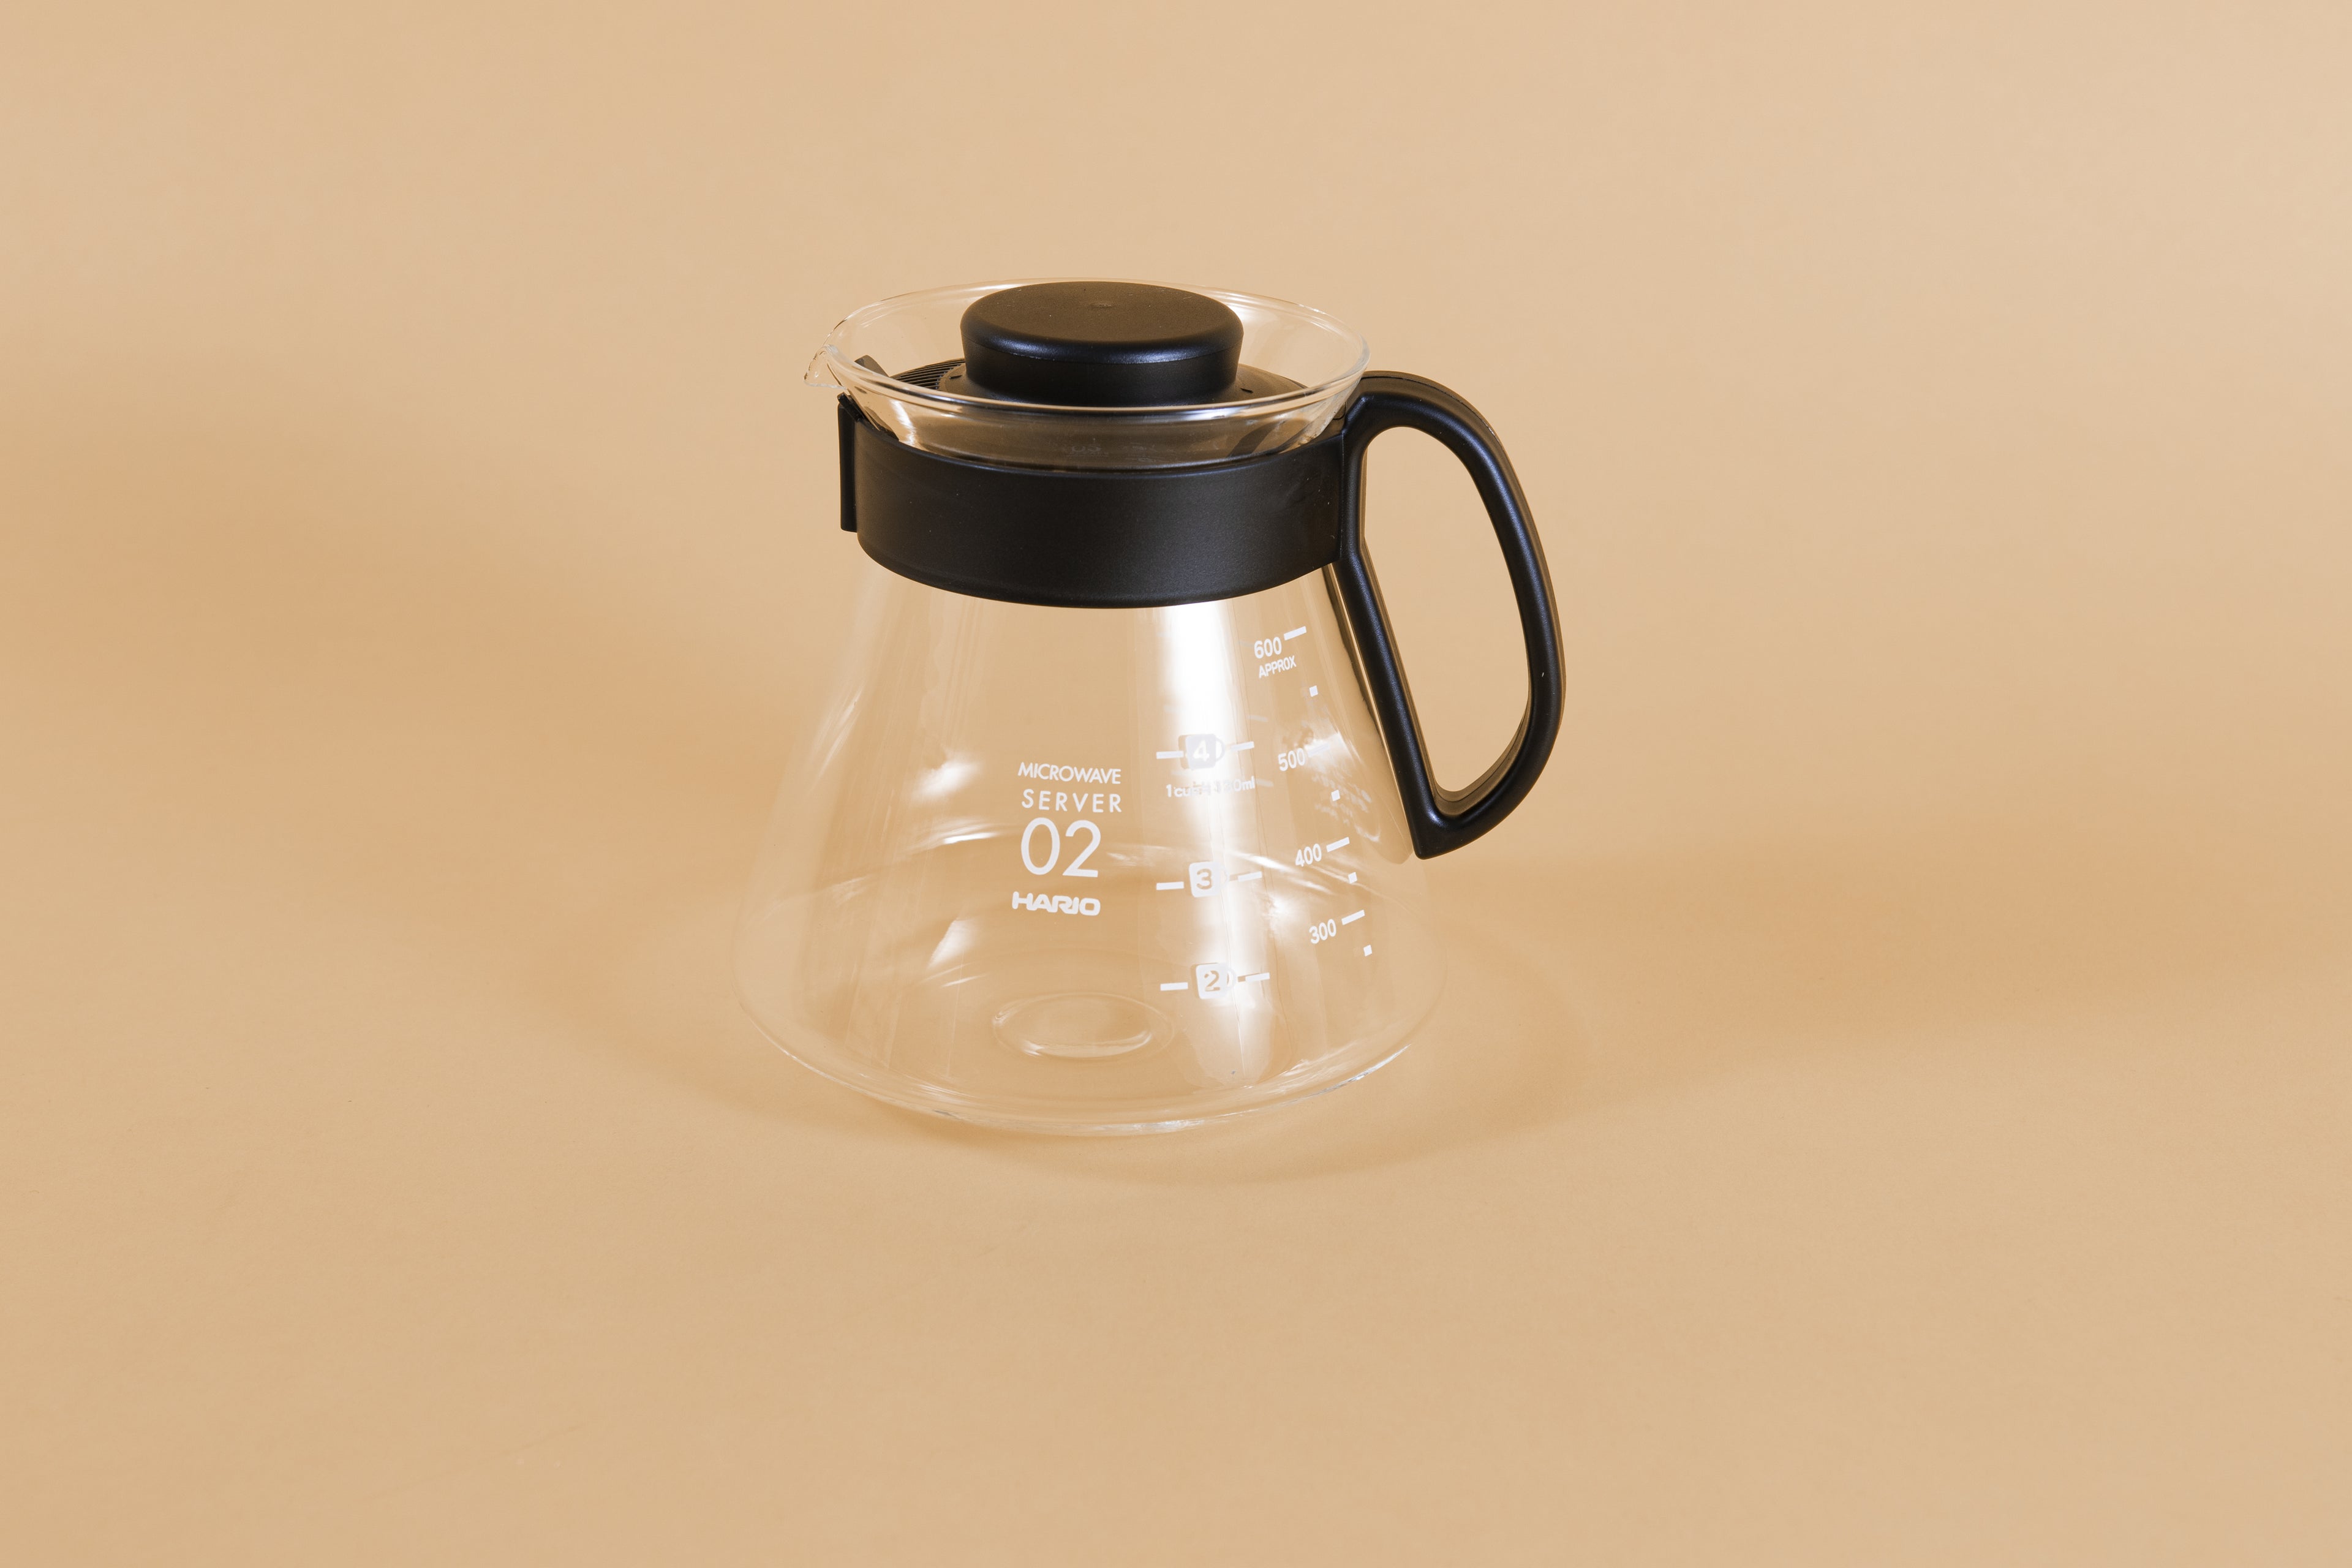 Glass coffee server with white text and level markings with closed black plastic handle and lid on an orange backdrop.